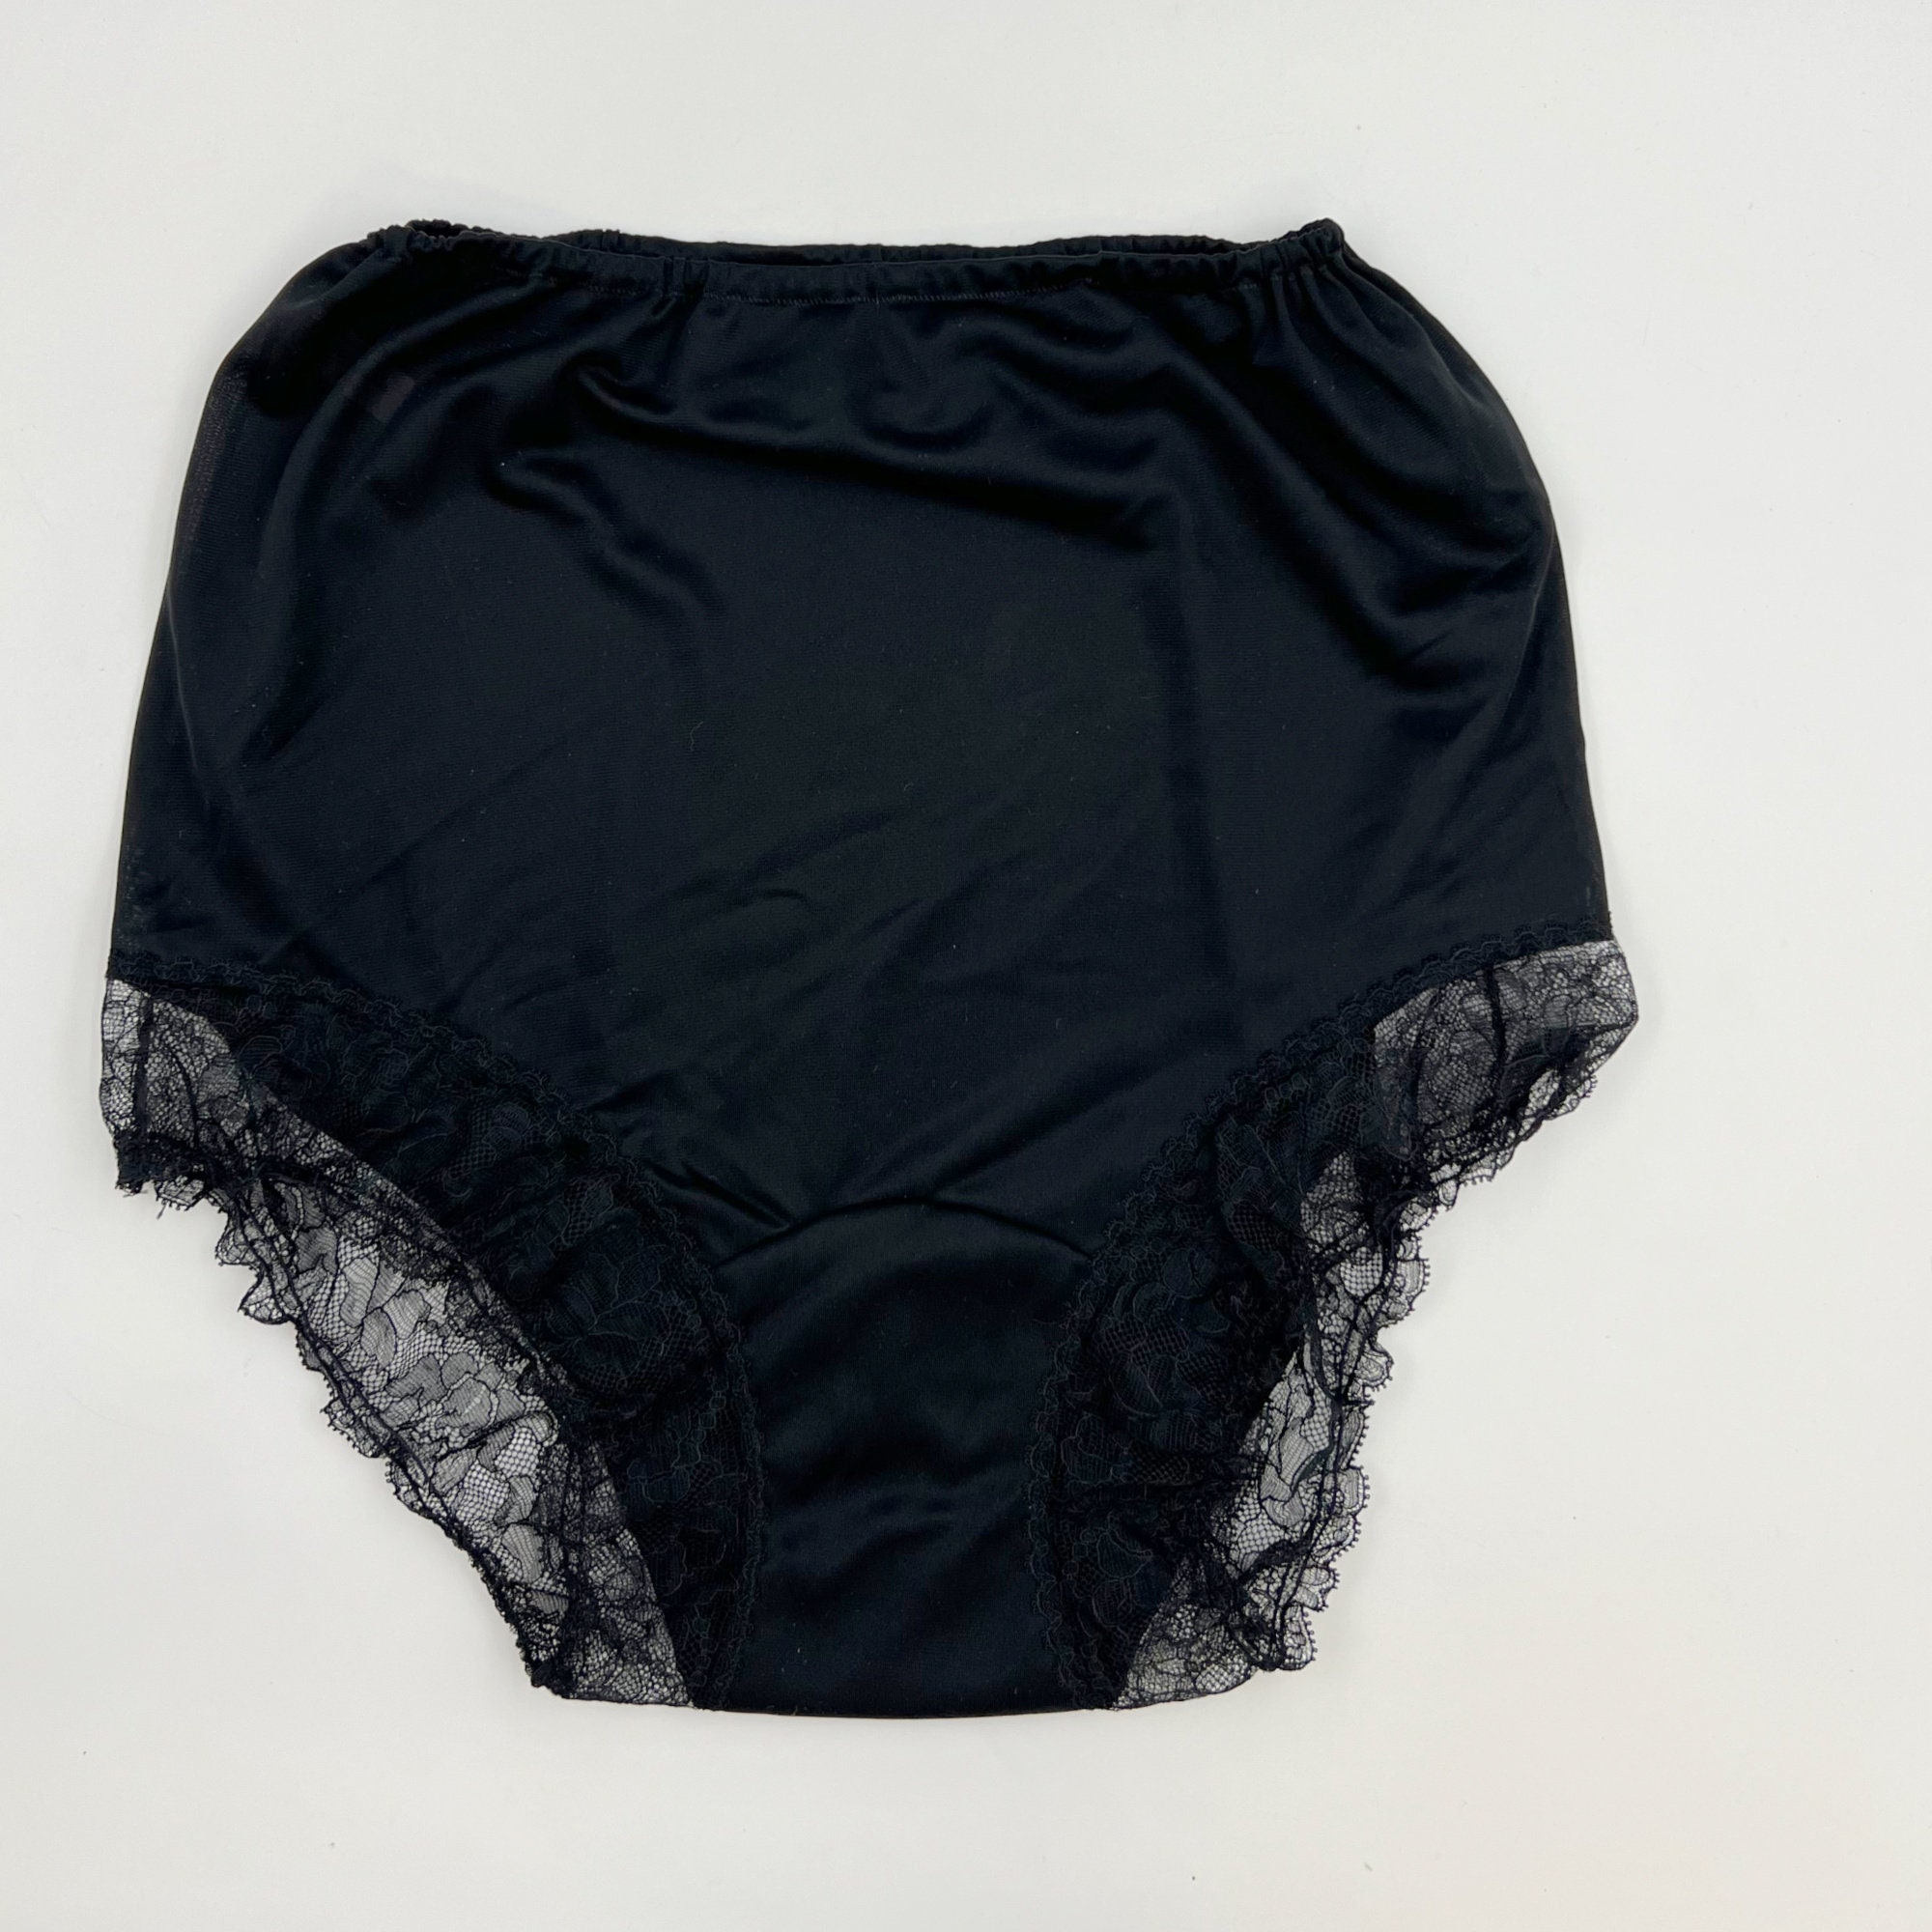 VINTAGE STYLE NYLON acetate directoire knickers panties size 24